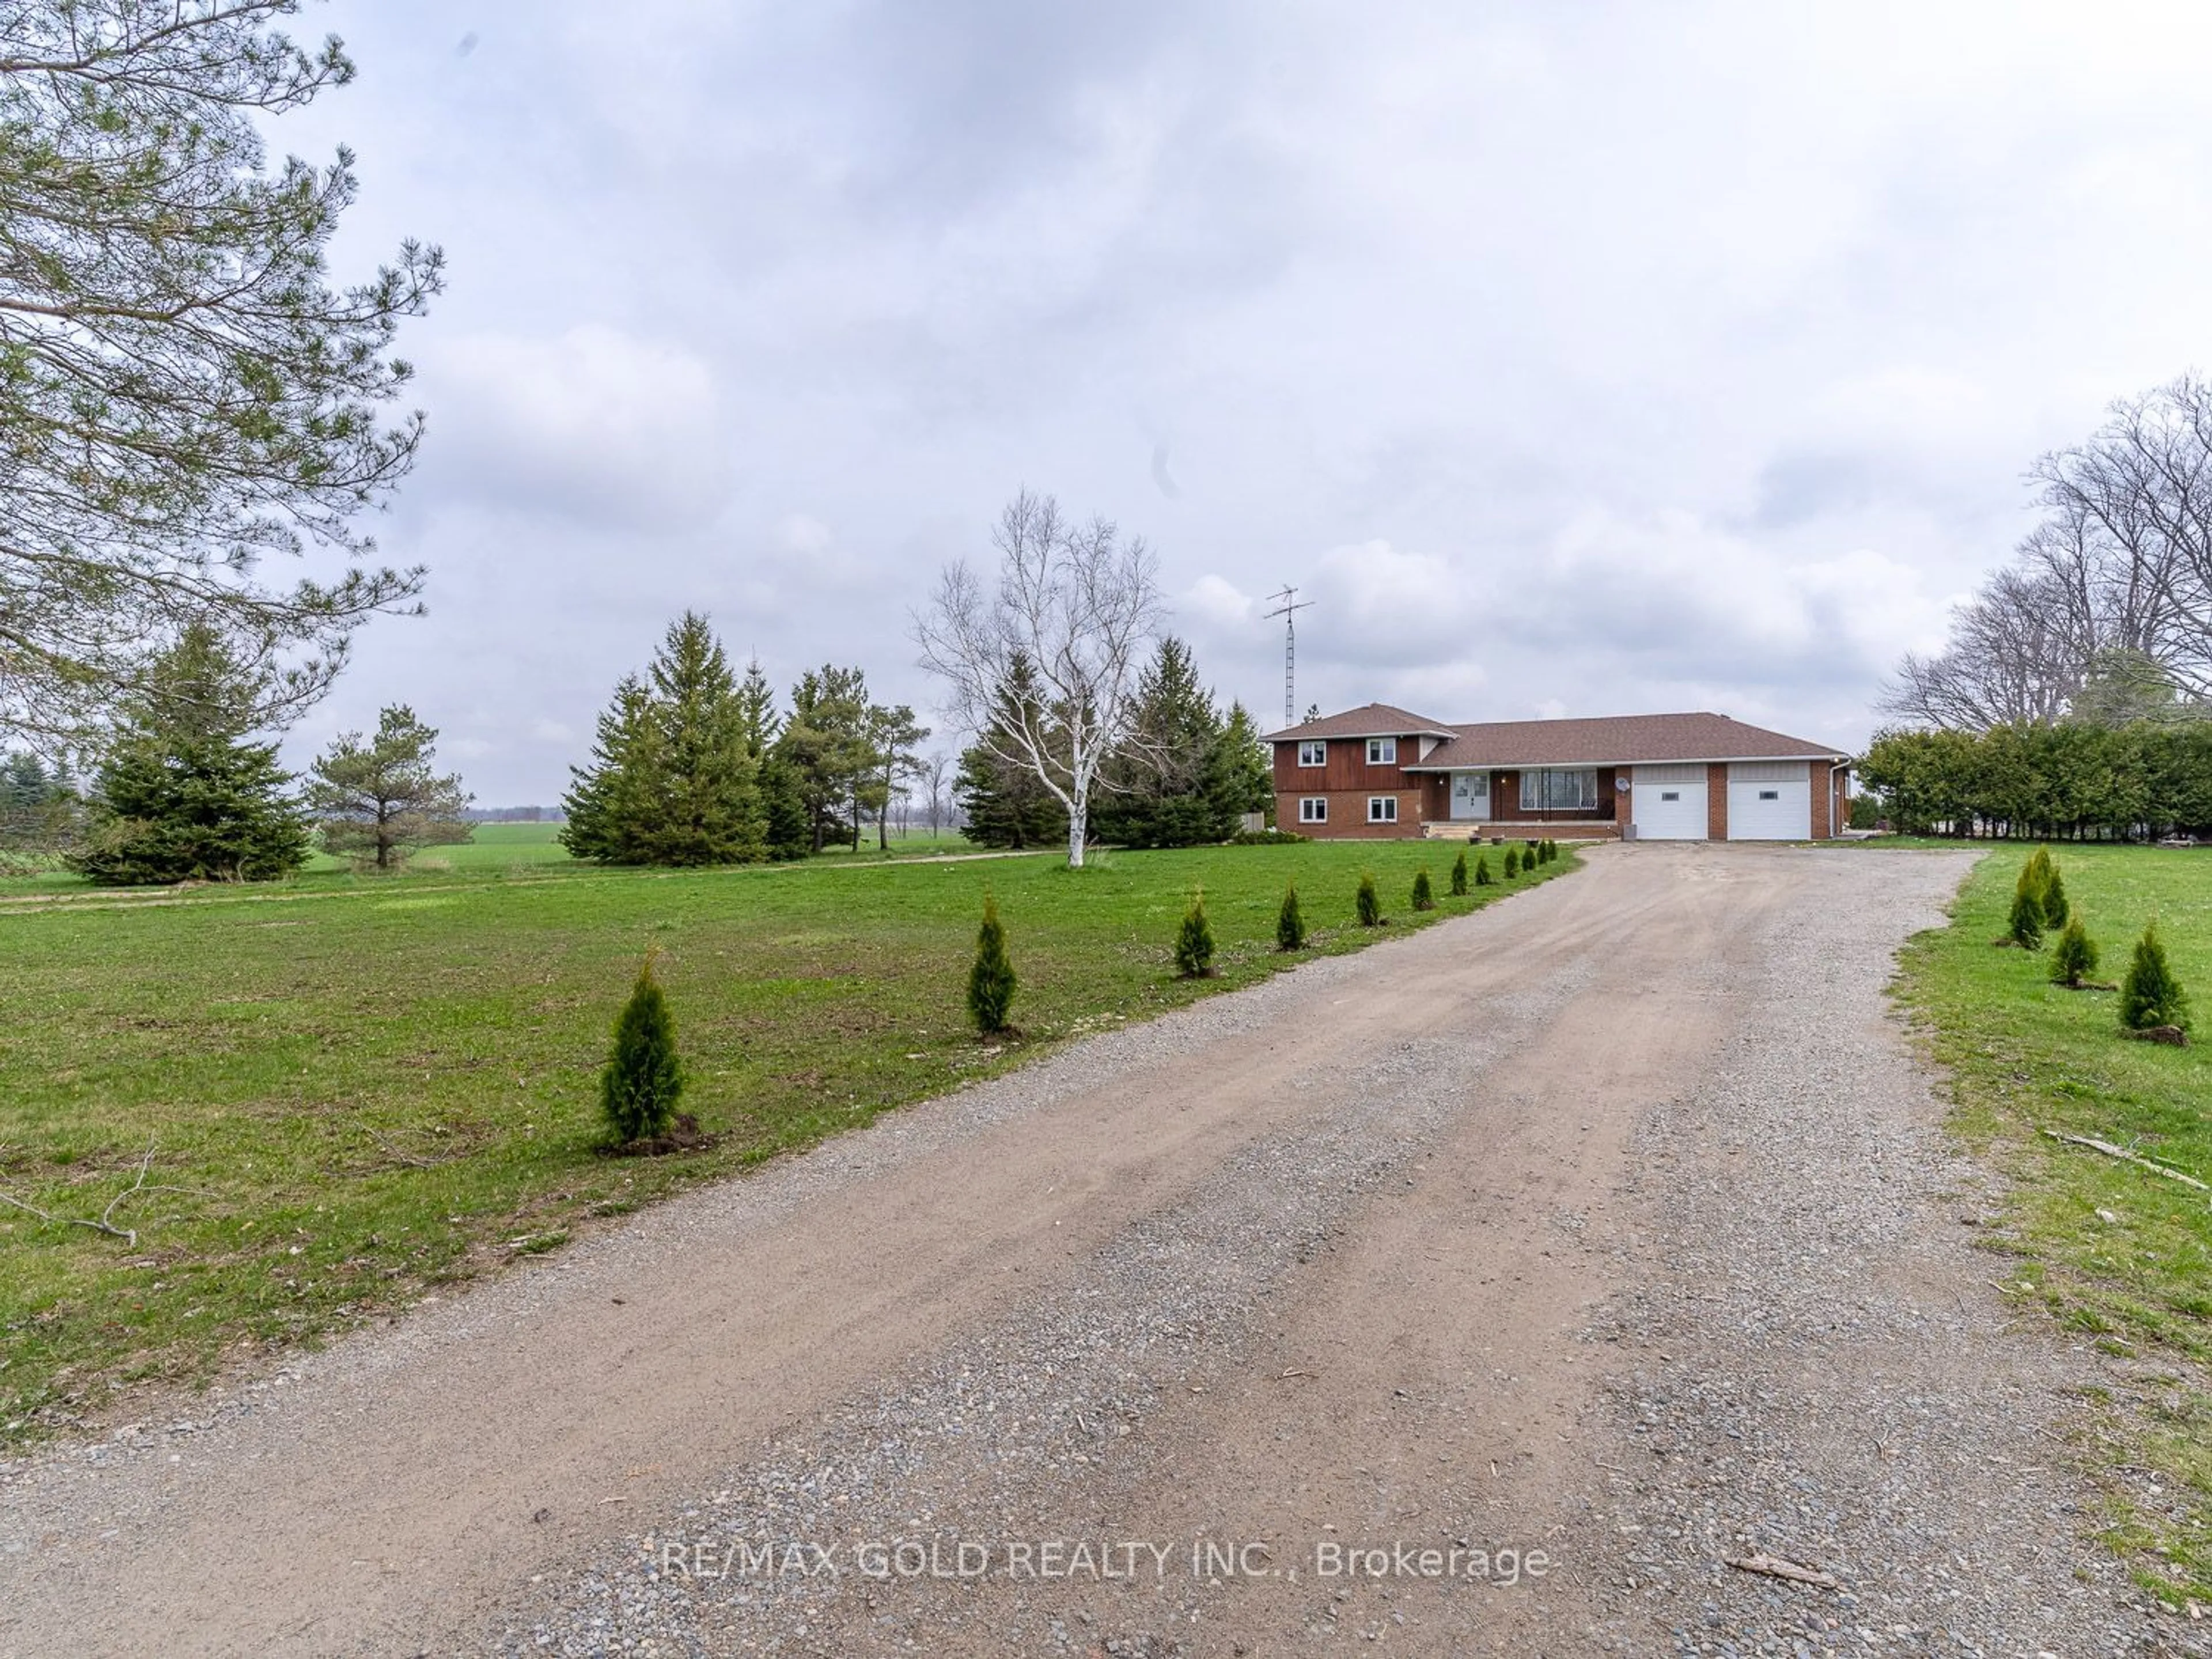 Street view for 20205 Kennedy Rd, Caledon Ontario L7K 1Z2